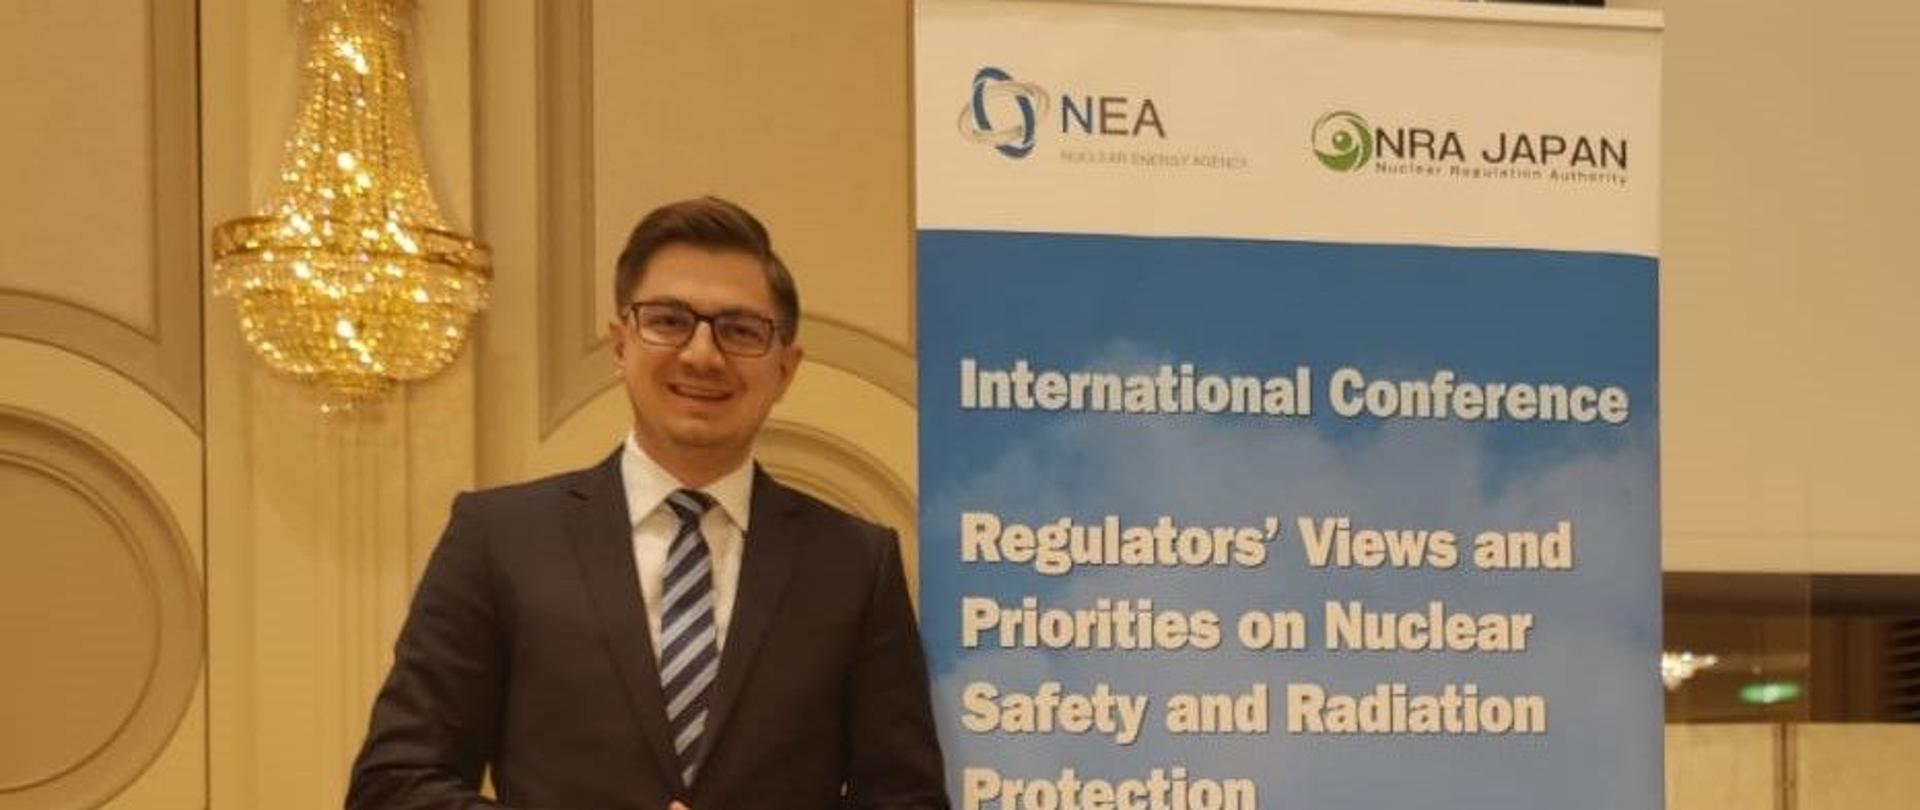 The President of the PAA at the conference on priorities in nuclear safety - Dr. Łukasz Młynarkiewicz is standing next to the banner promoting the conference